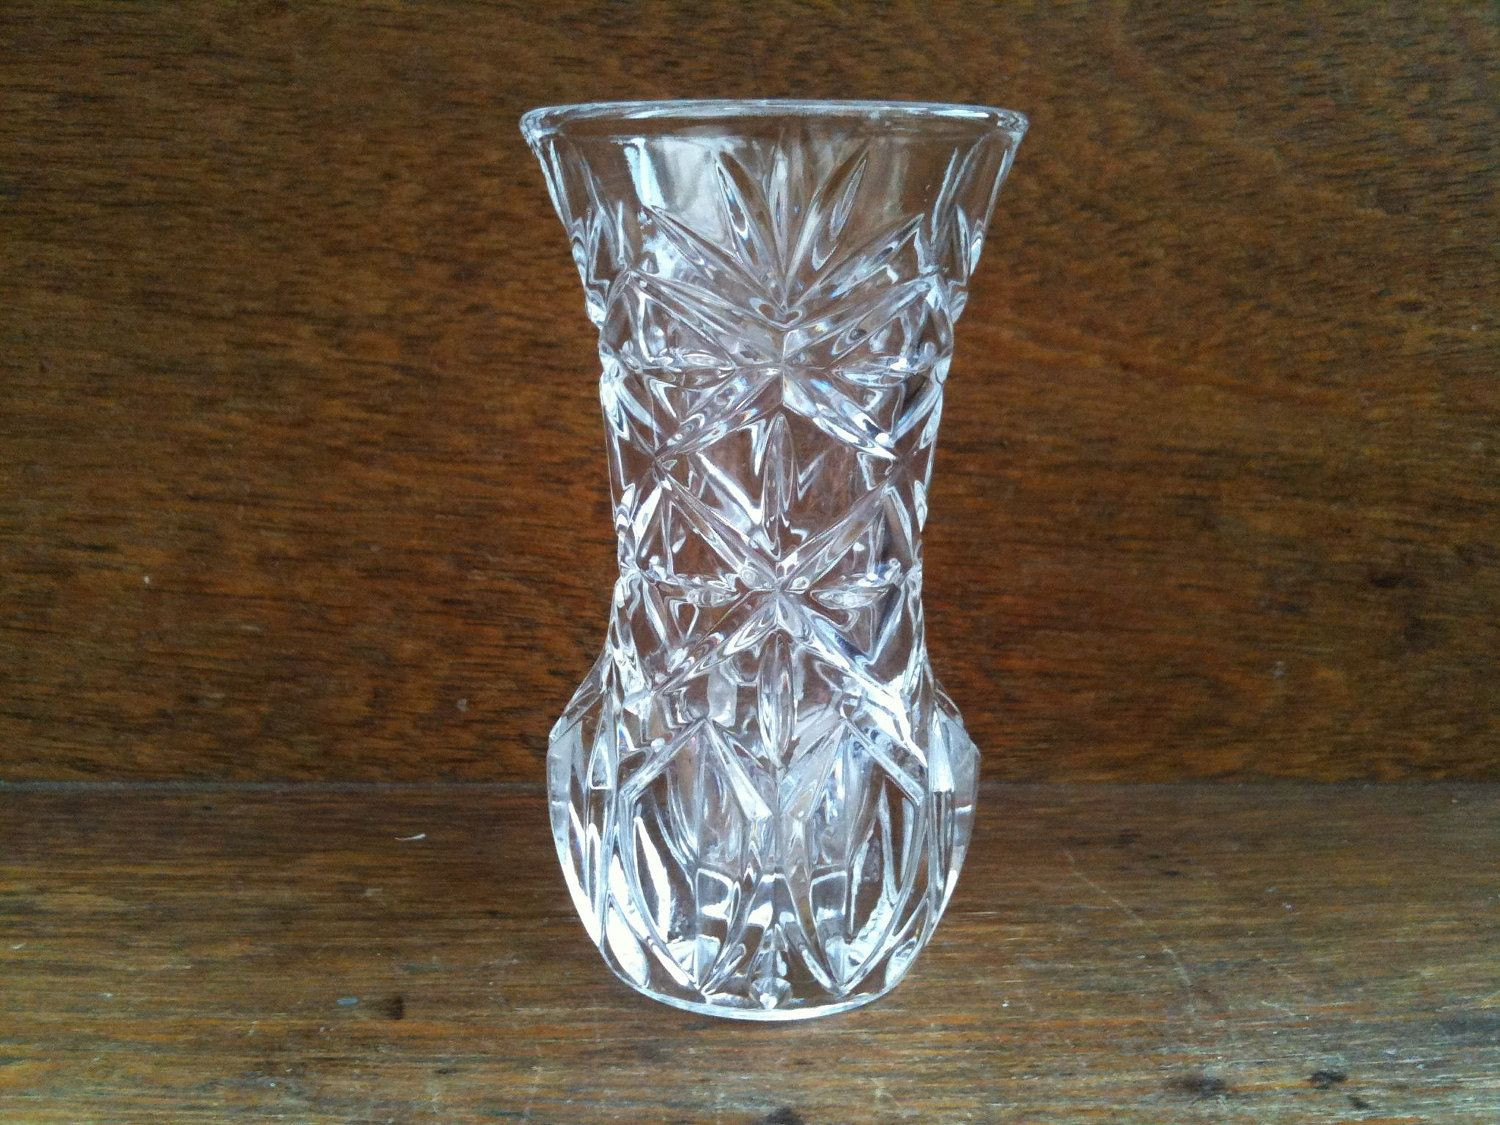 11 Lovable Thick Heavy Glass Vases 2023 free download thick heavy glass vases of vintage english small bud lead crystal glass vase circa 1950s with regard to vintage english small bud lead crystal glass vase circa 1950s purchase in store here h